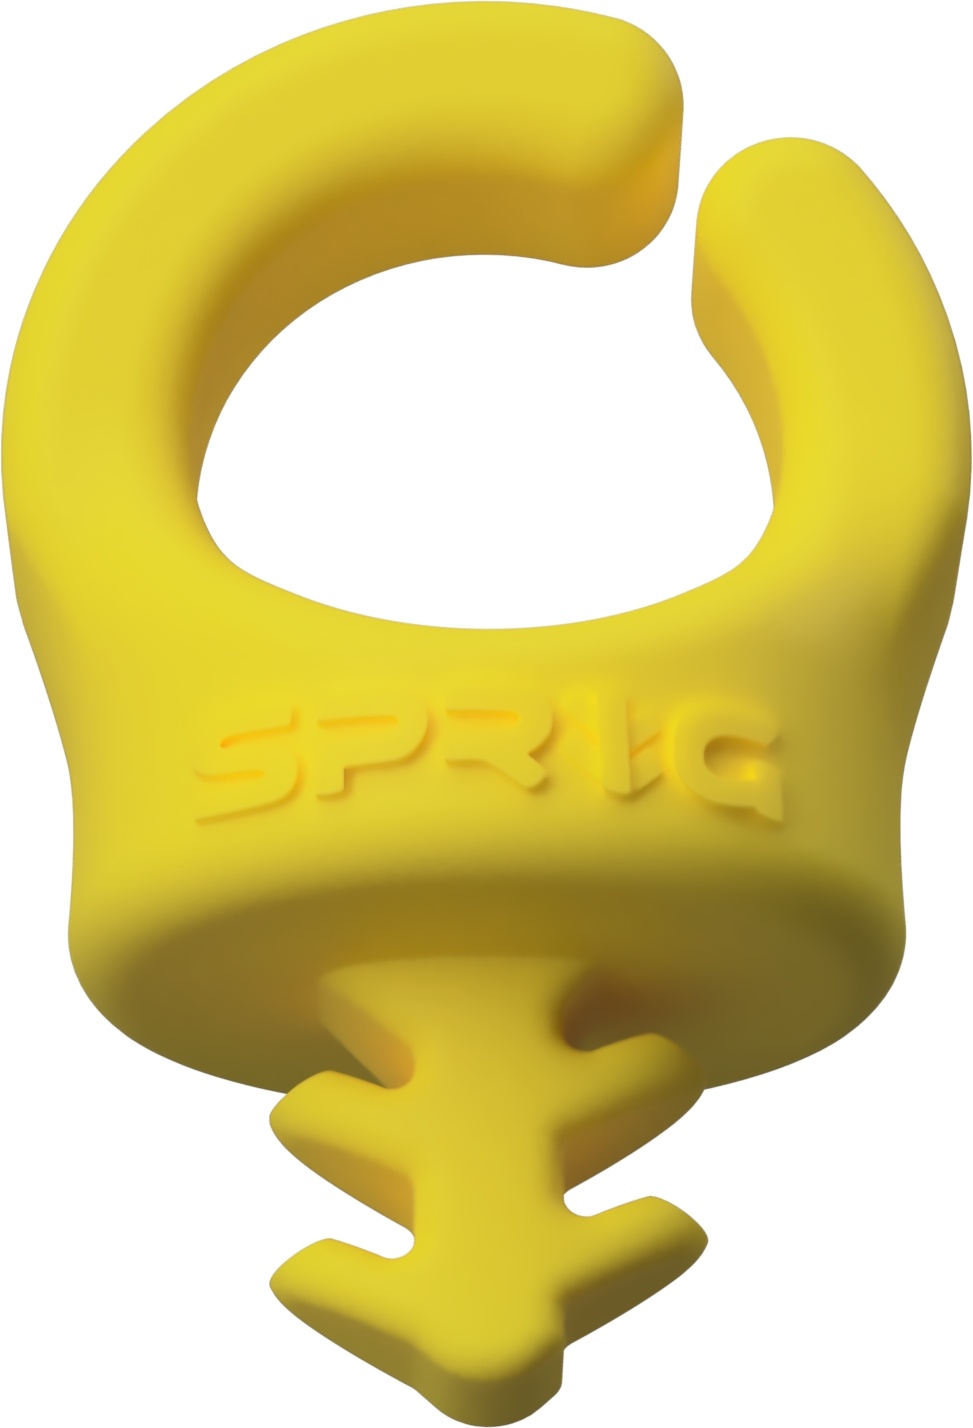 Sprig Cable Management Device for Camera Rigs (3-Pack, 3/8"-16, Yellow)